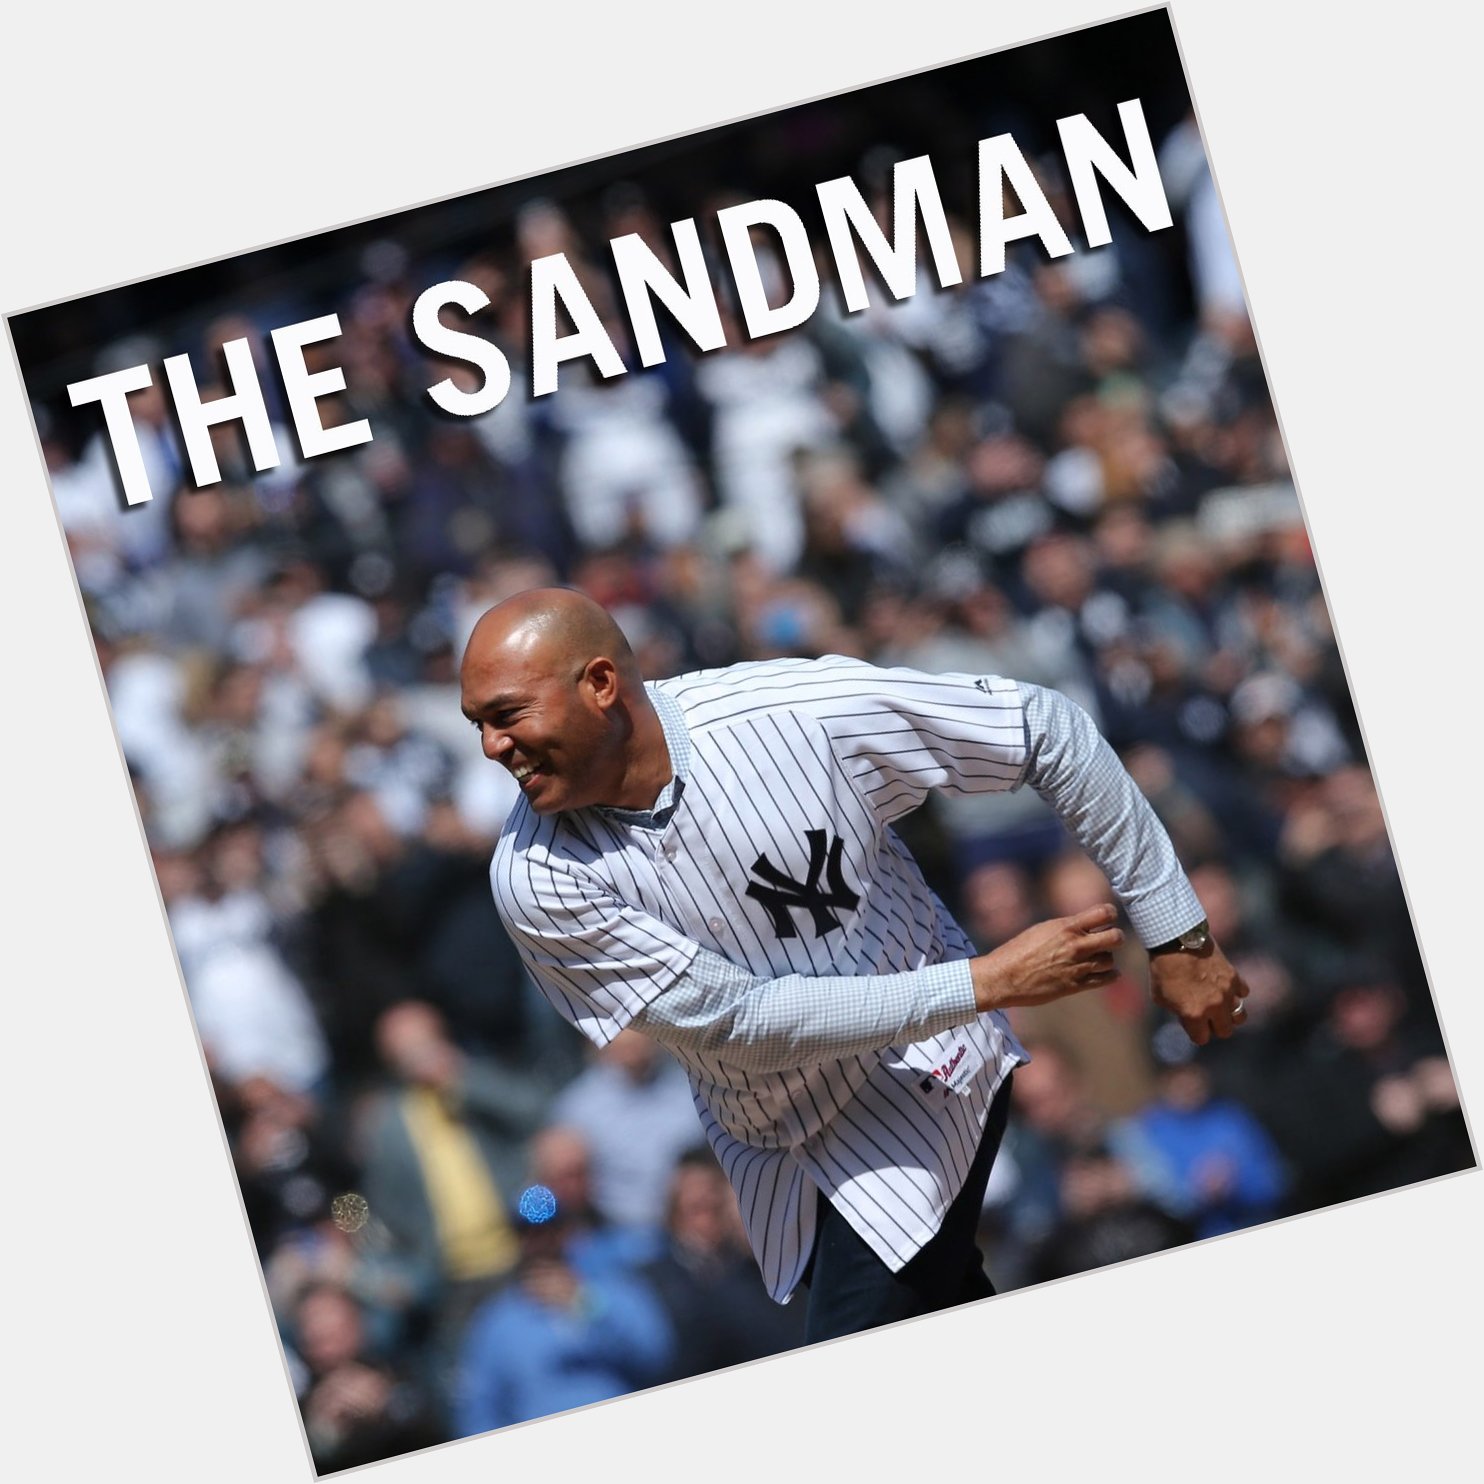 Happy 50th birthday, Mariano Rivera!

Here\s how he came to be known as THE SANDMAN  